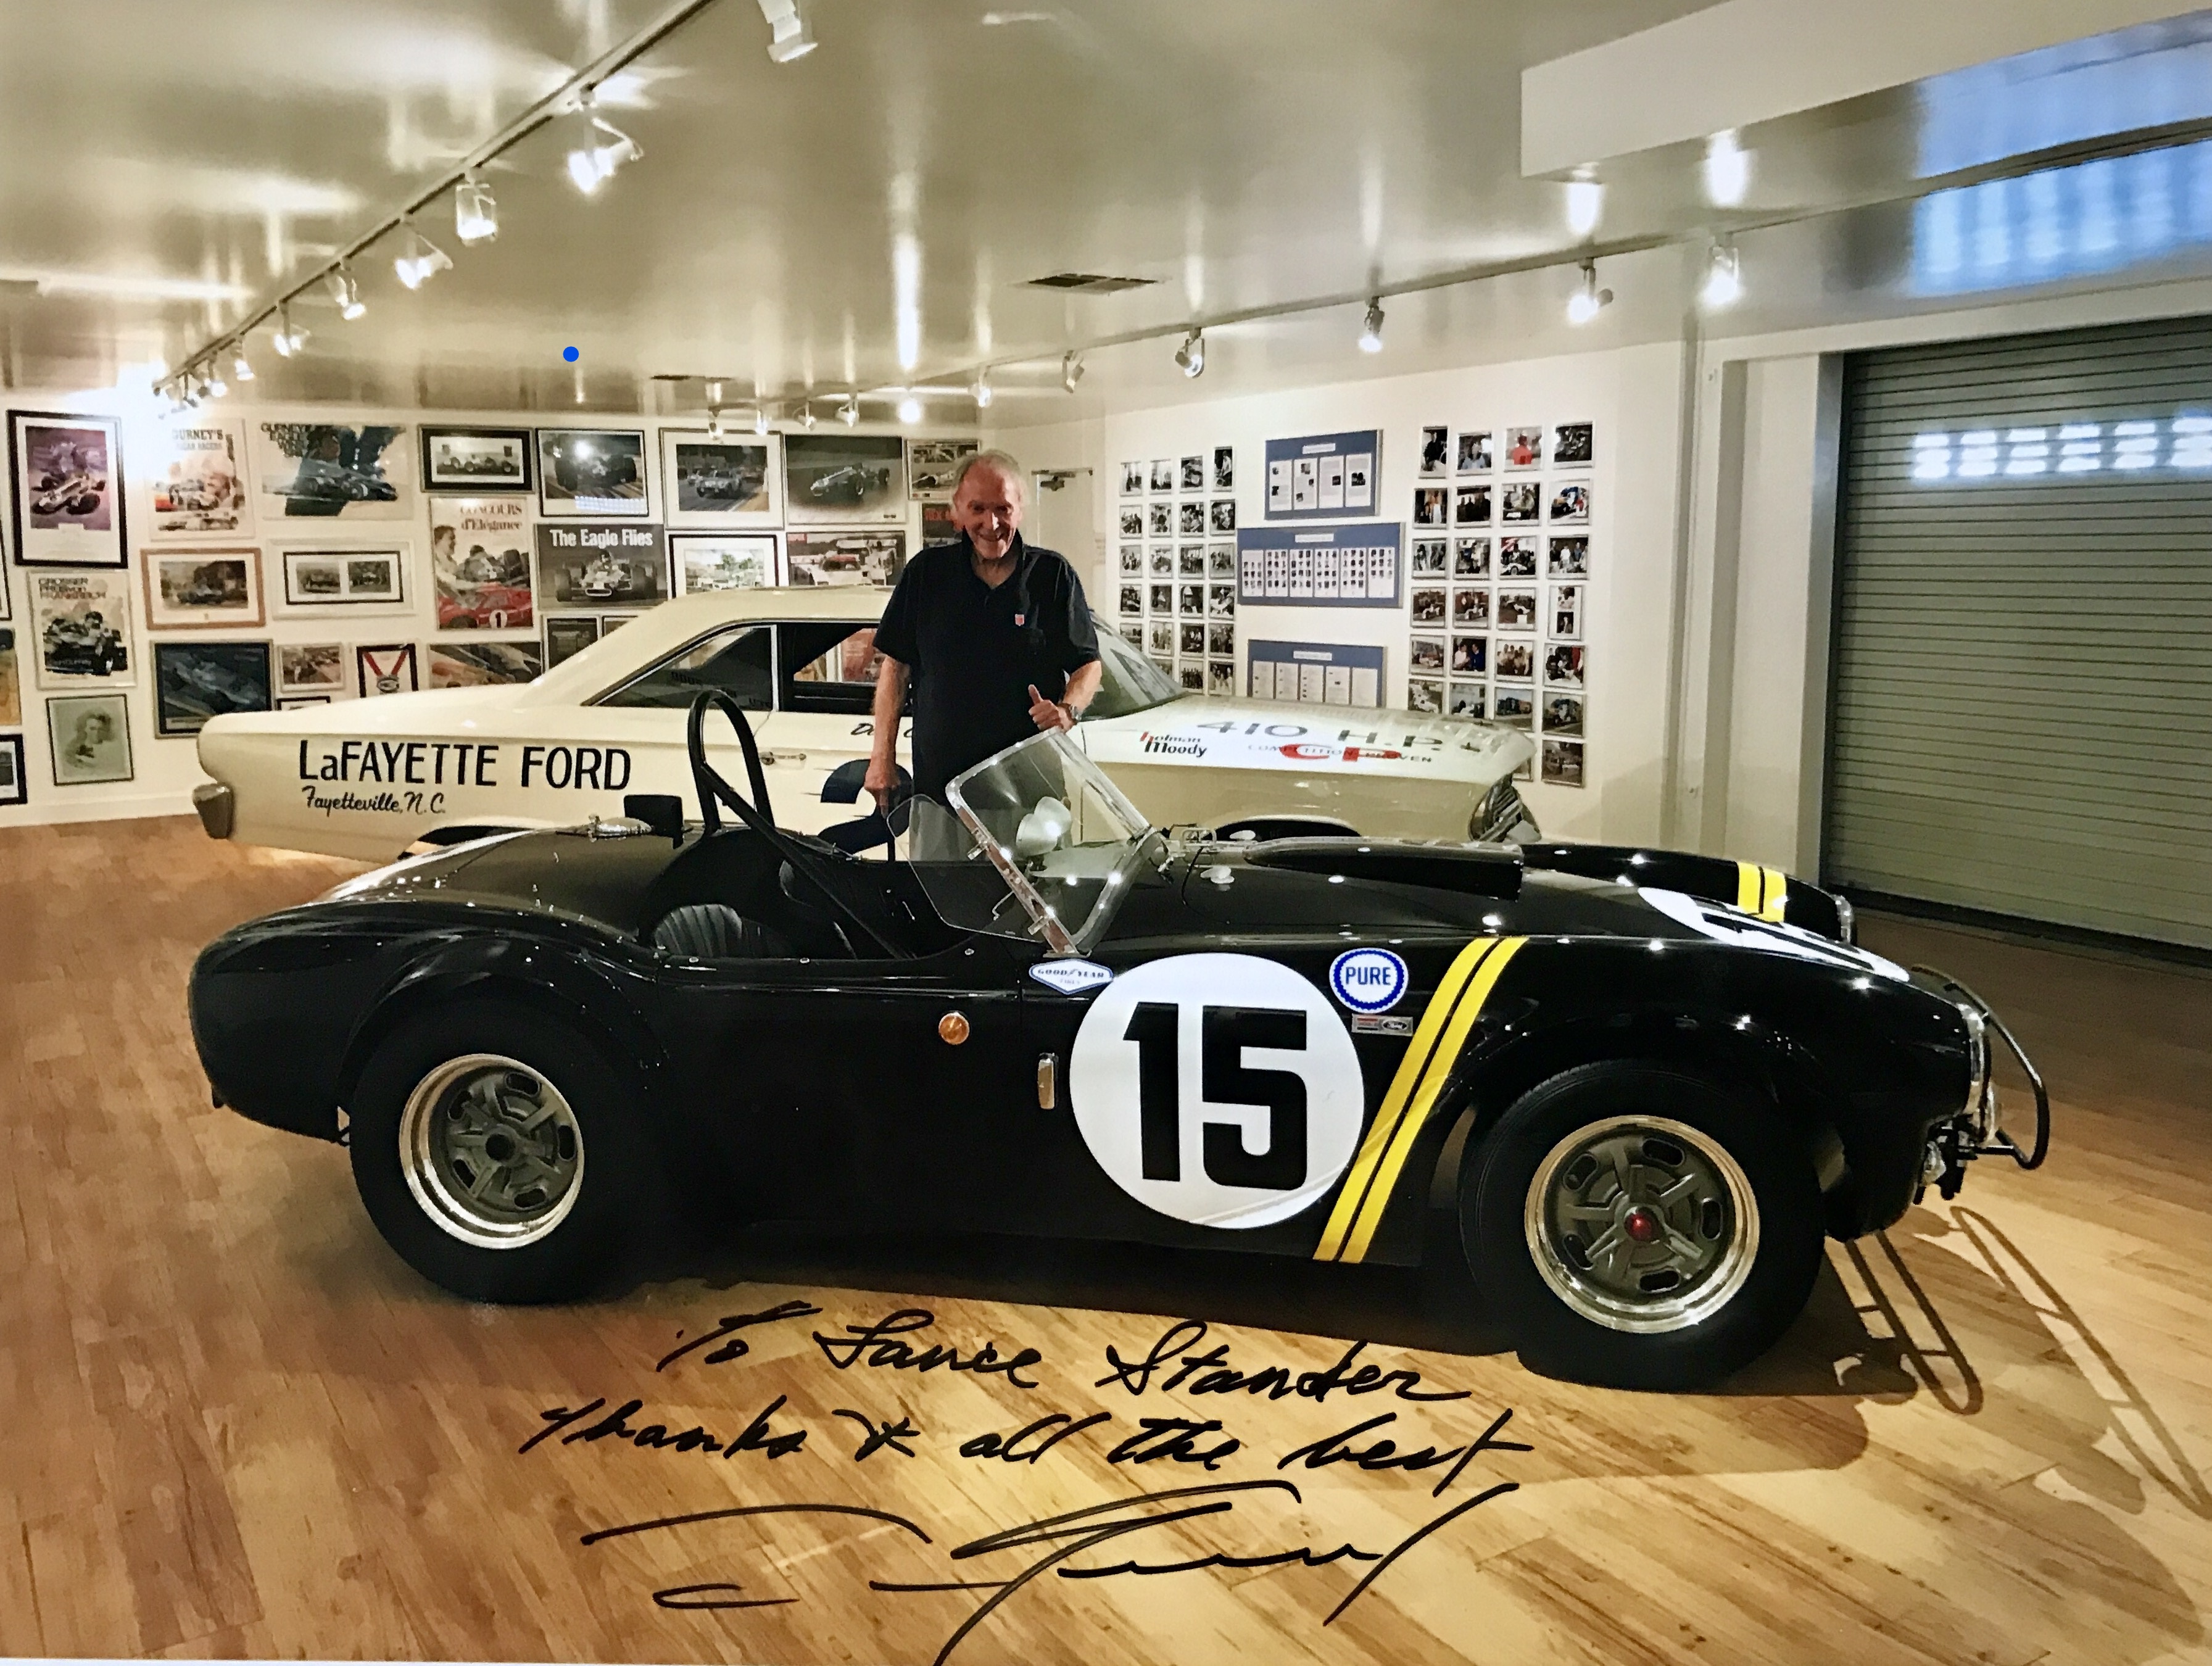 SUPERFORMANCE REMEMBERS OUR FRIEND AND COLLEAGUE, RACING LEGEND DAN GURNEY